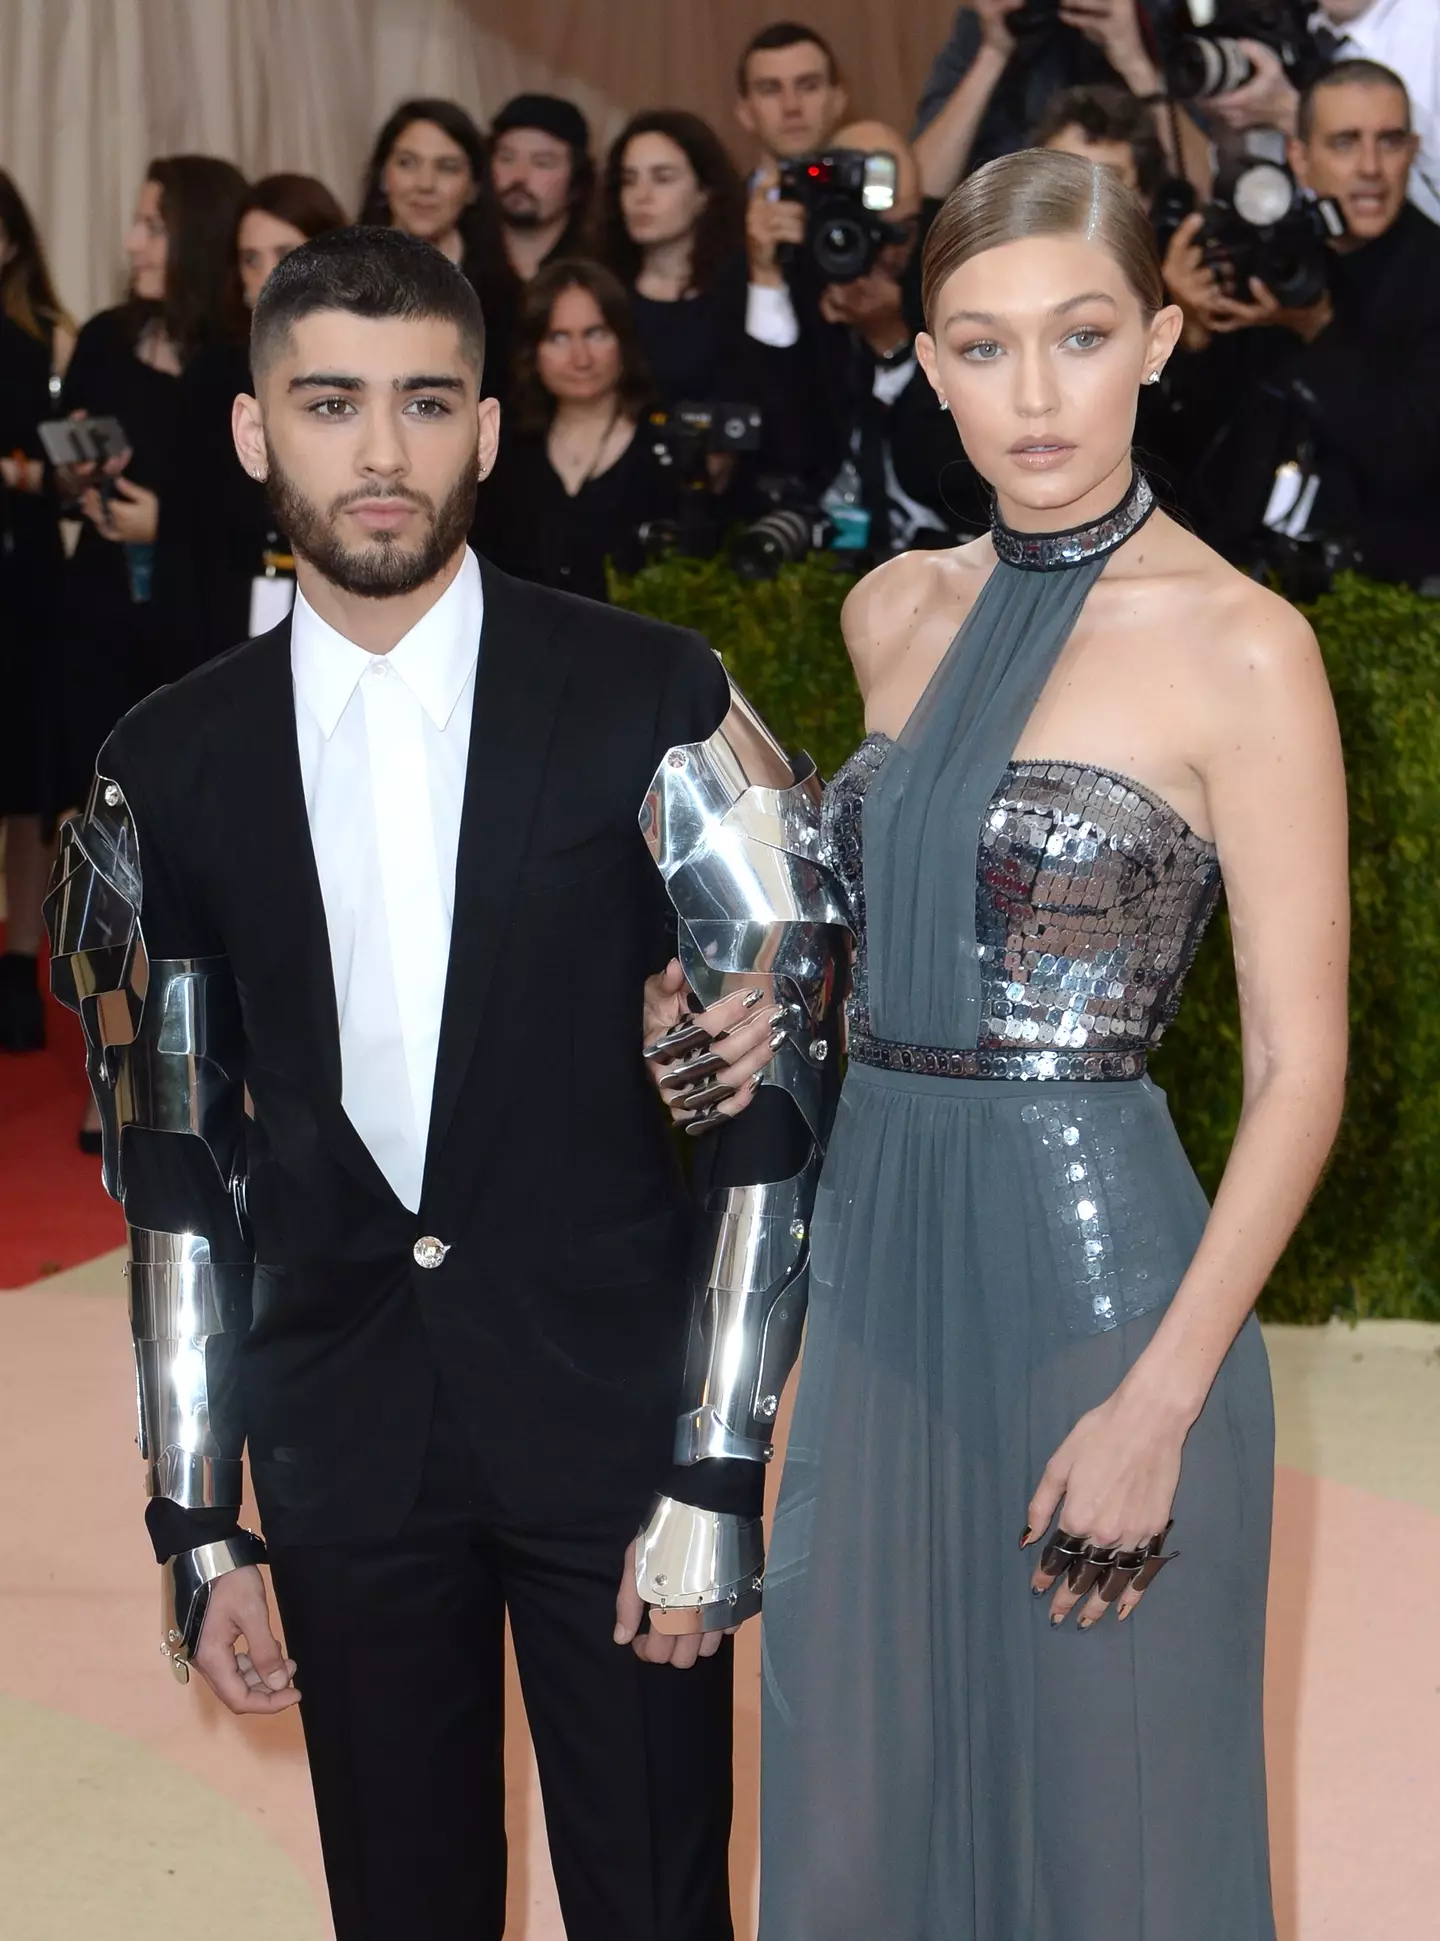 Gigi Hadid and Zayn have been dating since 2015 (